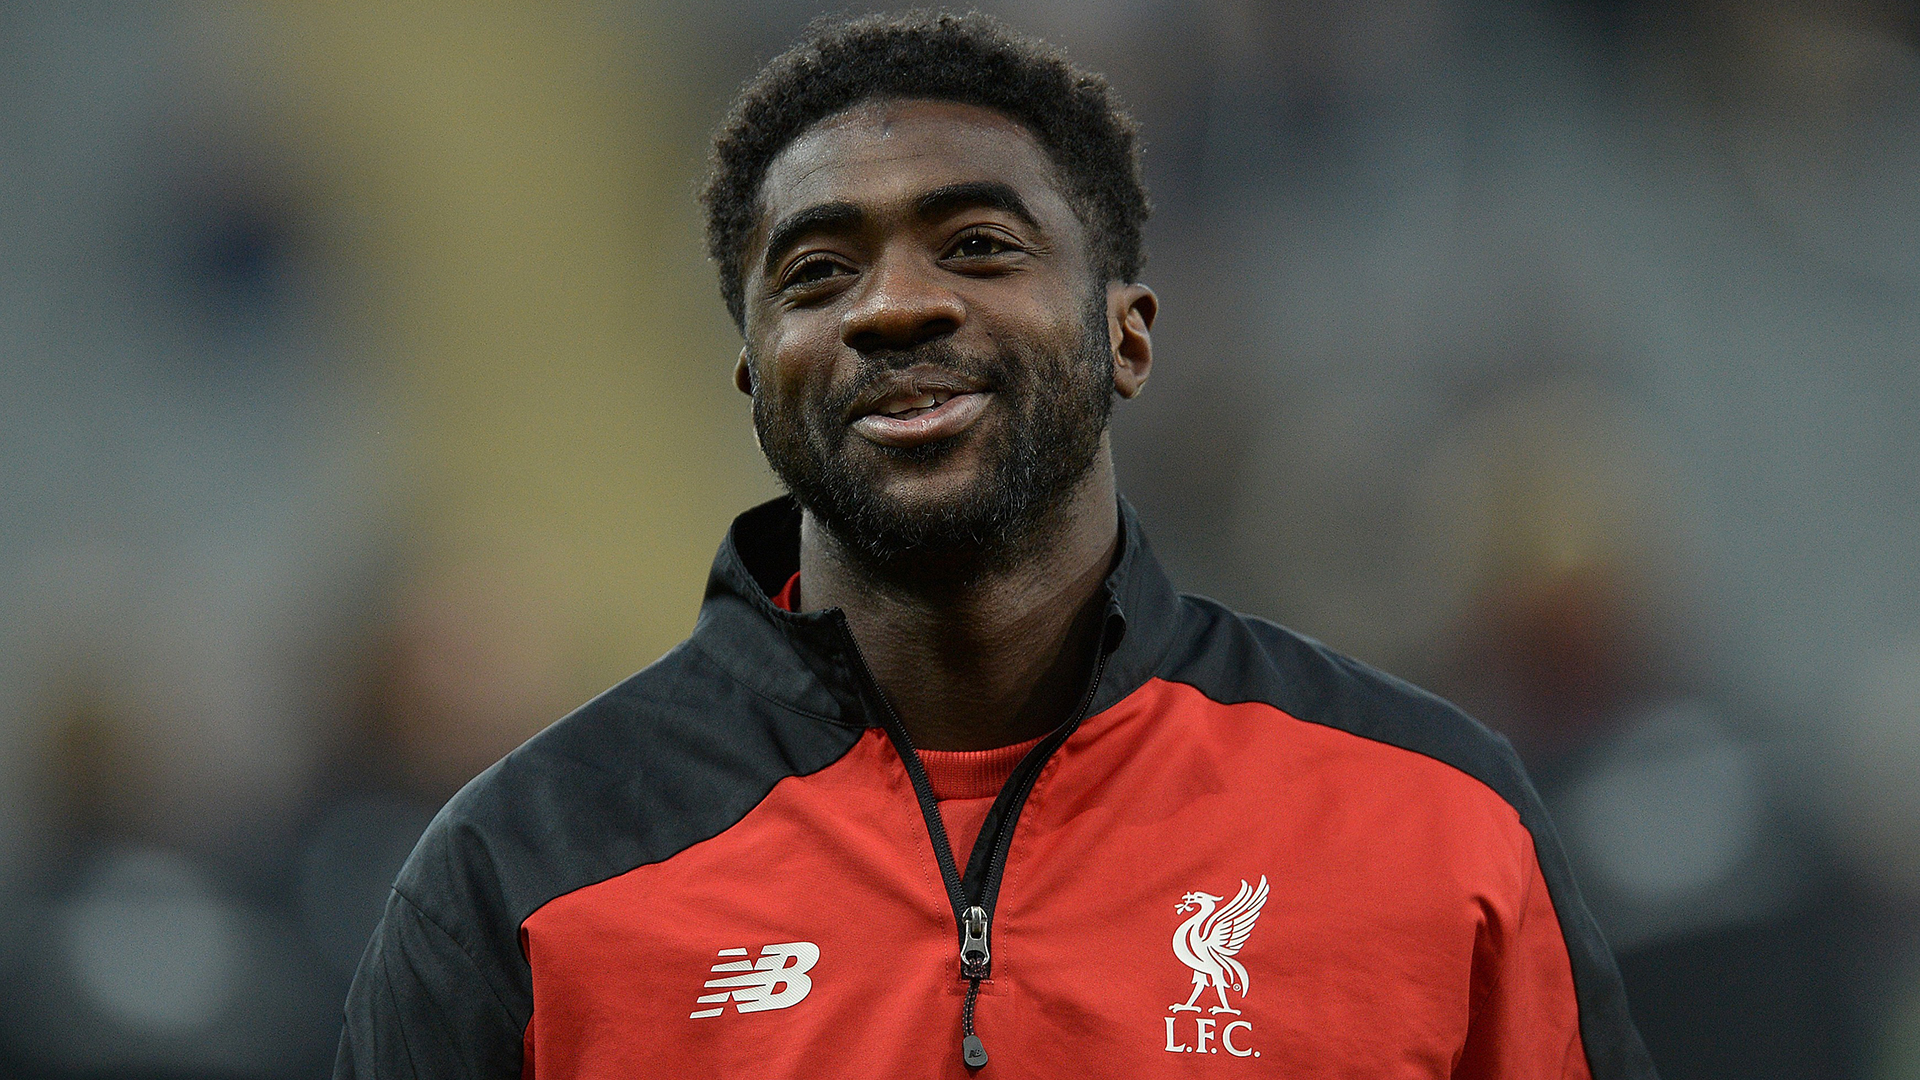 The ridiculing of Toure: Why Kolo deserved much better